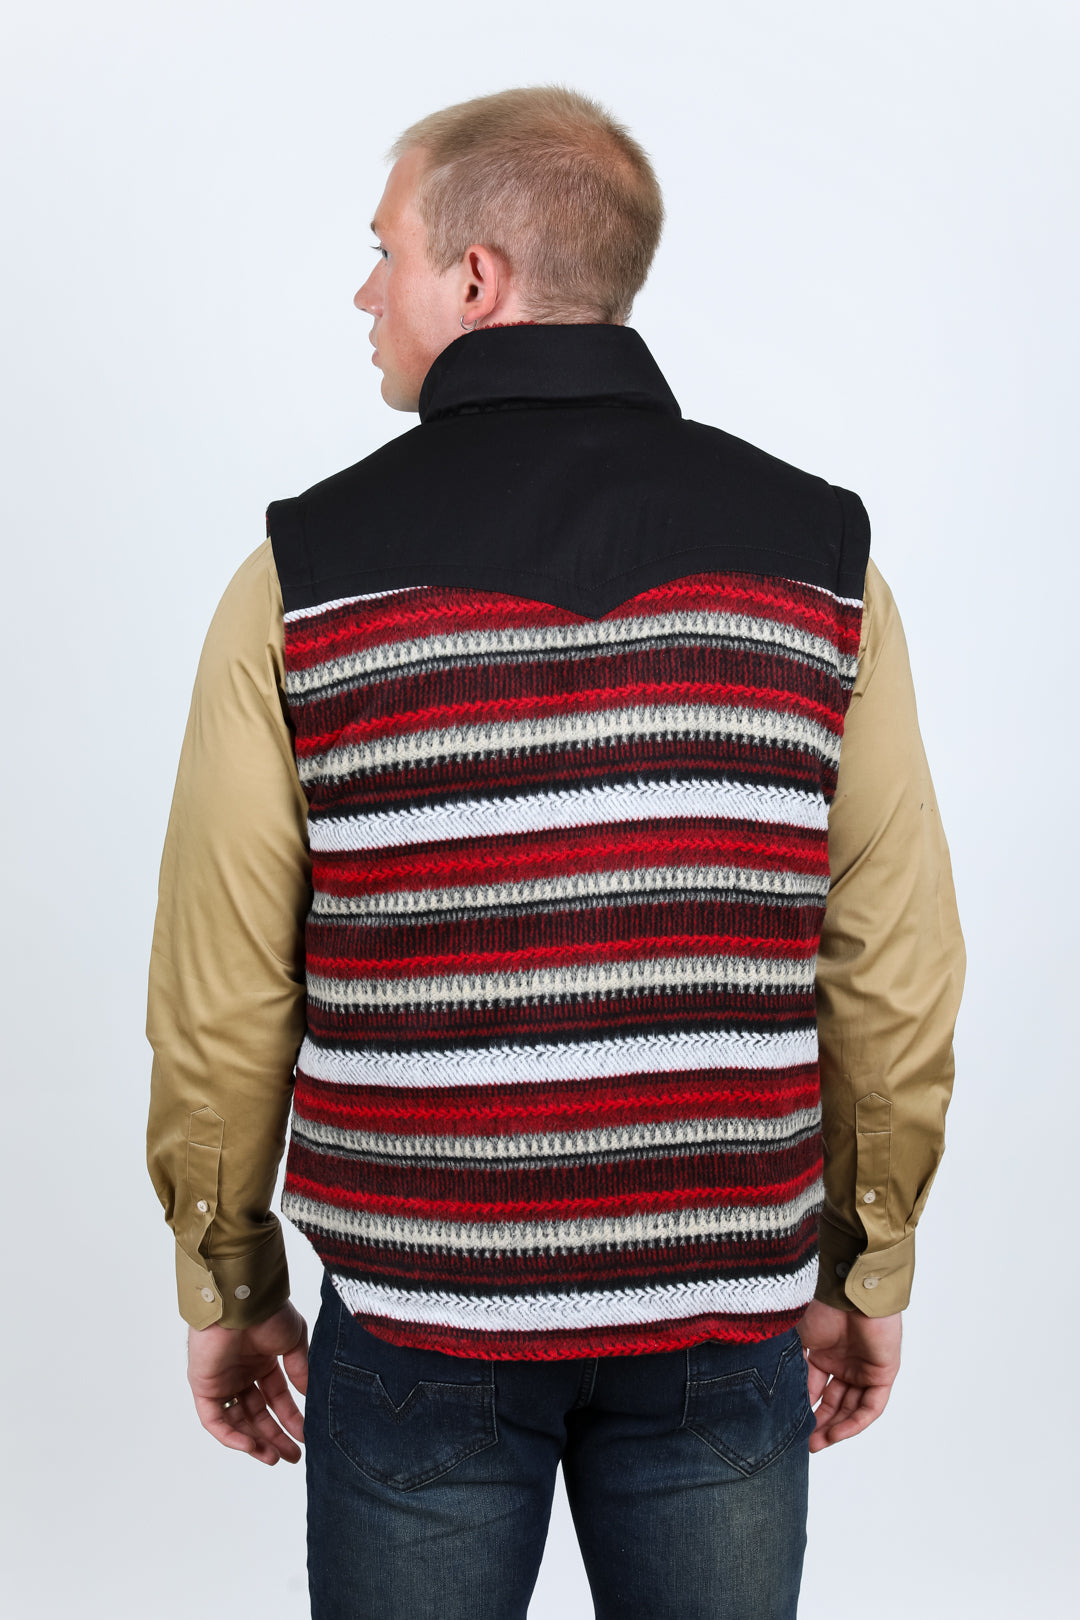 Mens Ethnic Aztec Quilted Fur Lined Vest - Red